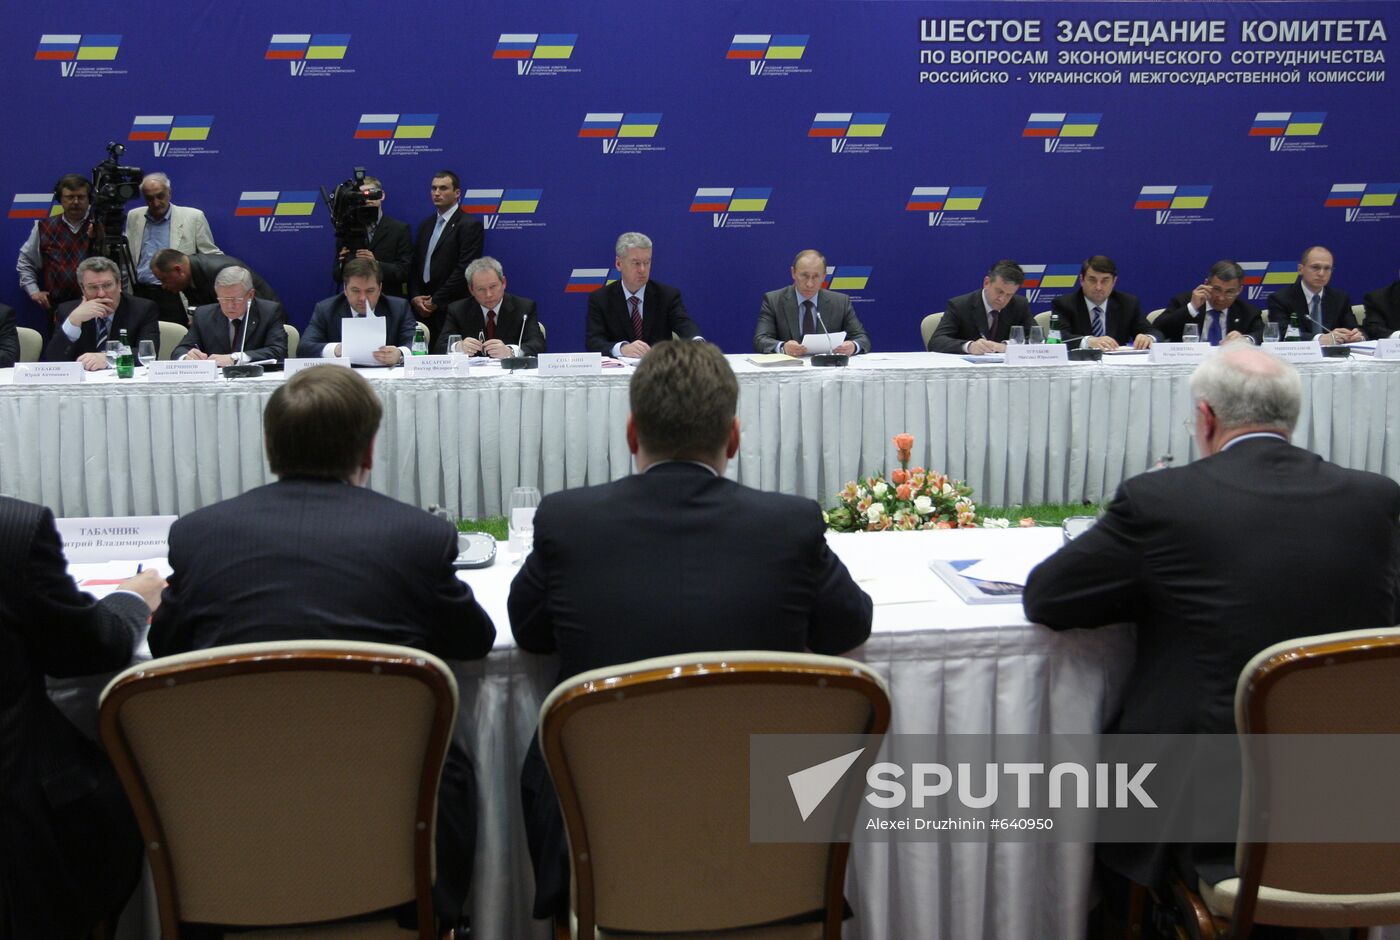 Session of Russian-Ukrainian Interstate Commission